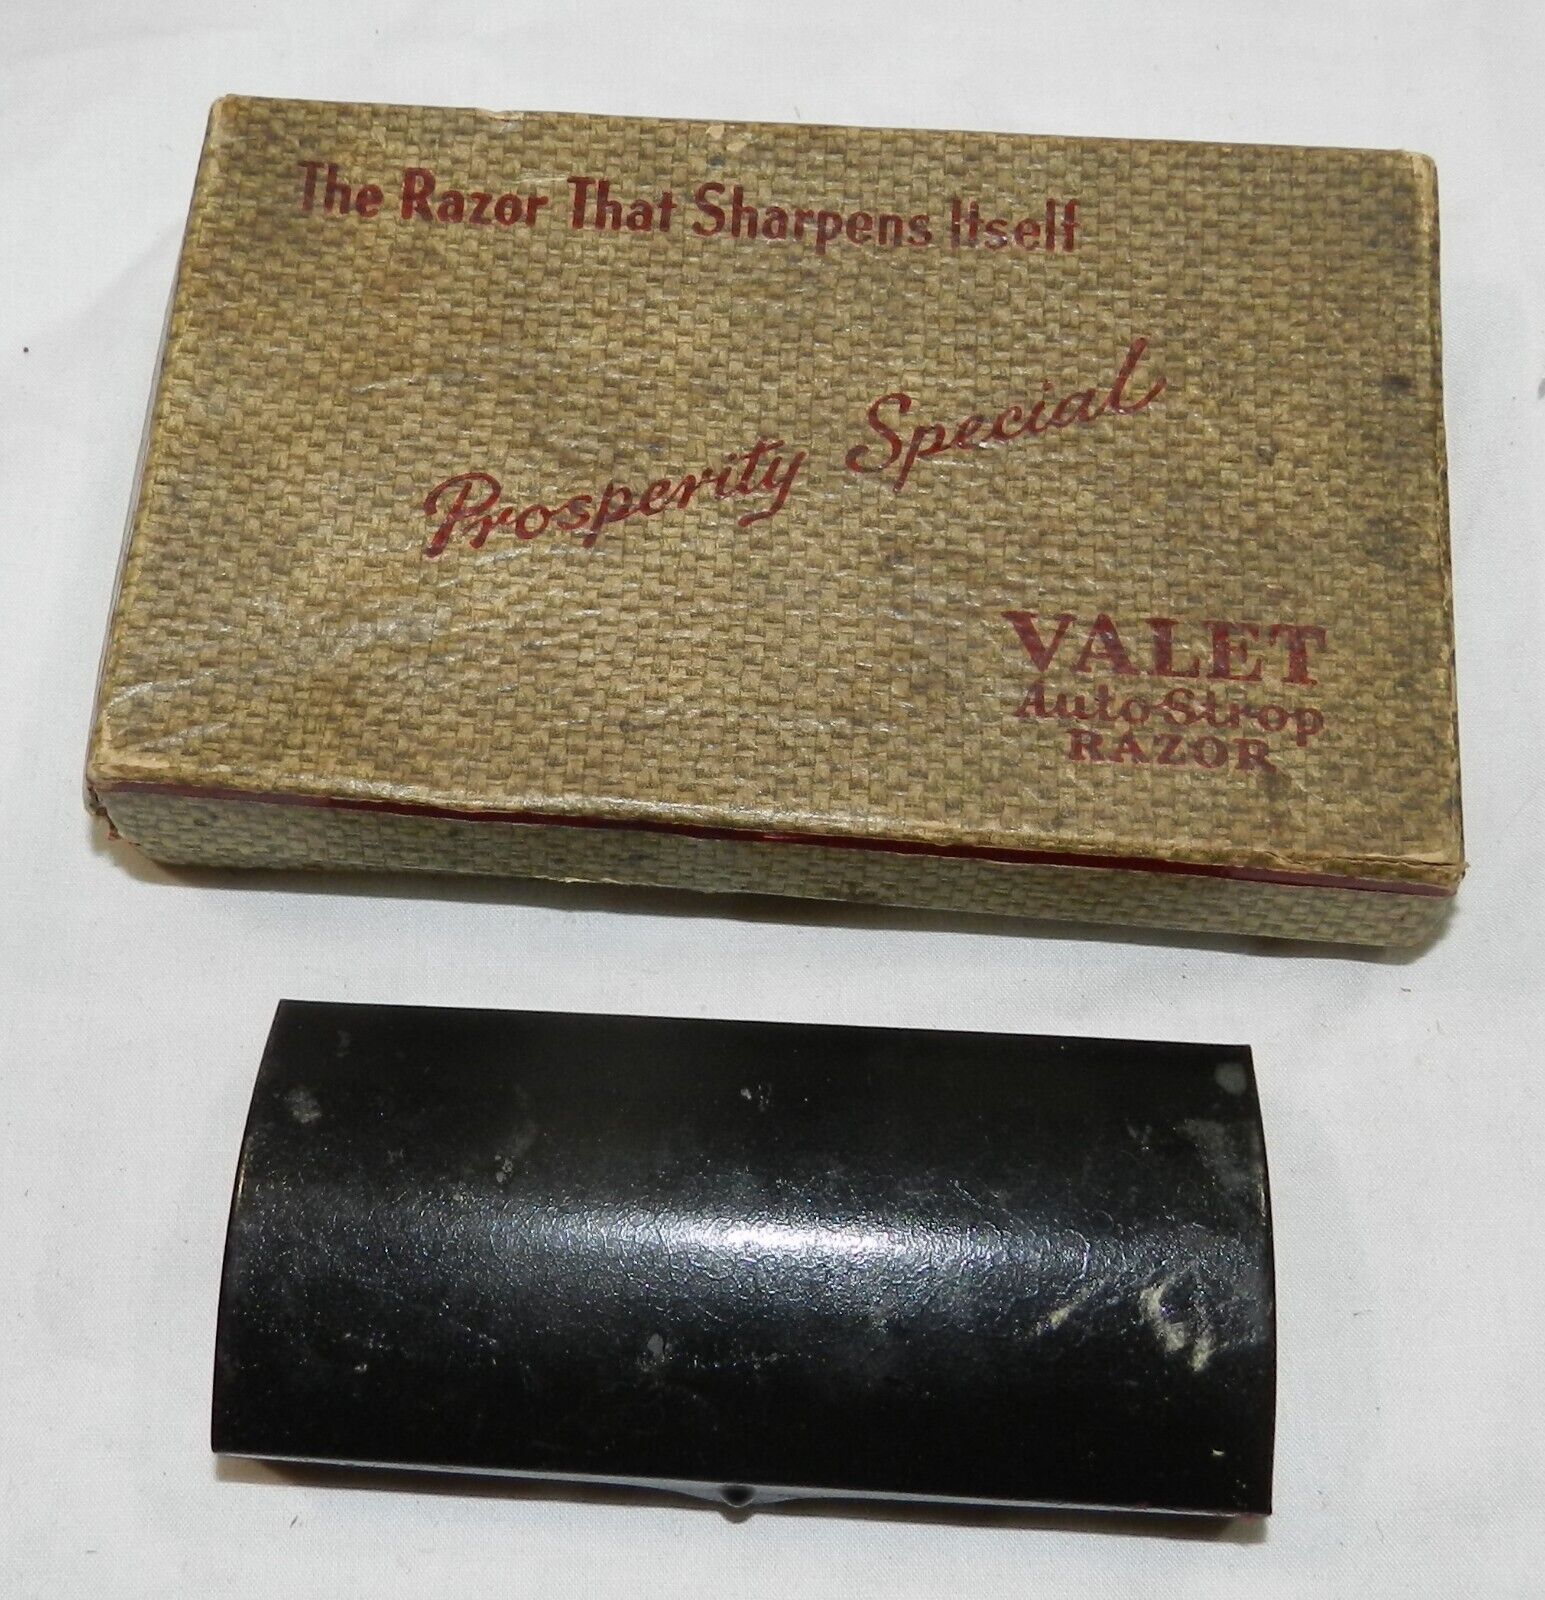 Lot of 2 Vintage Valet Auto-Strop safety Razors with boxes